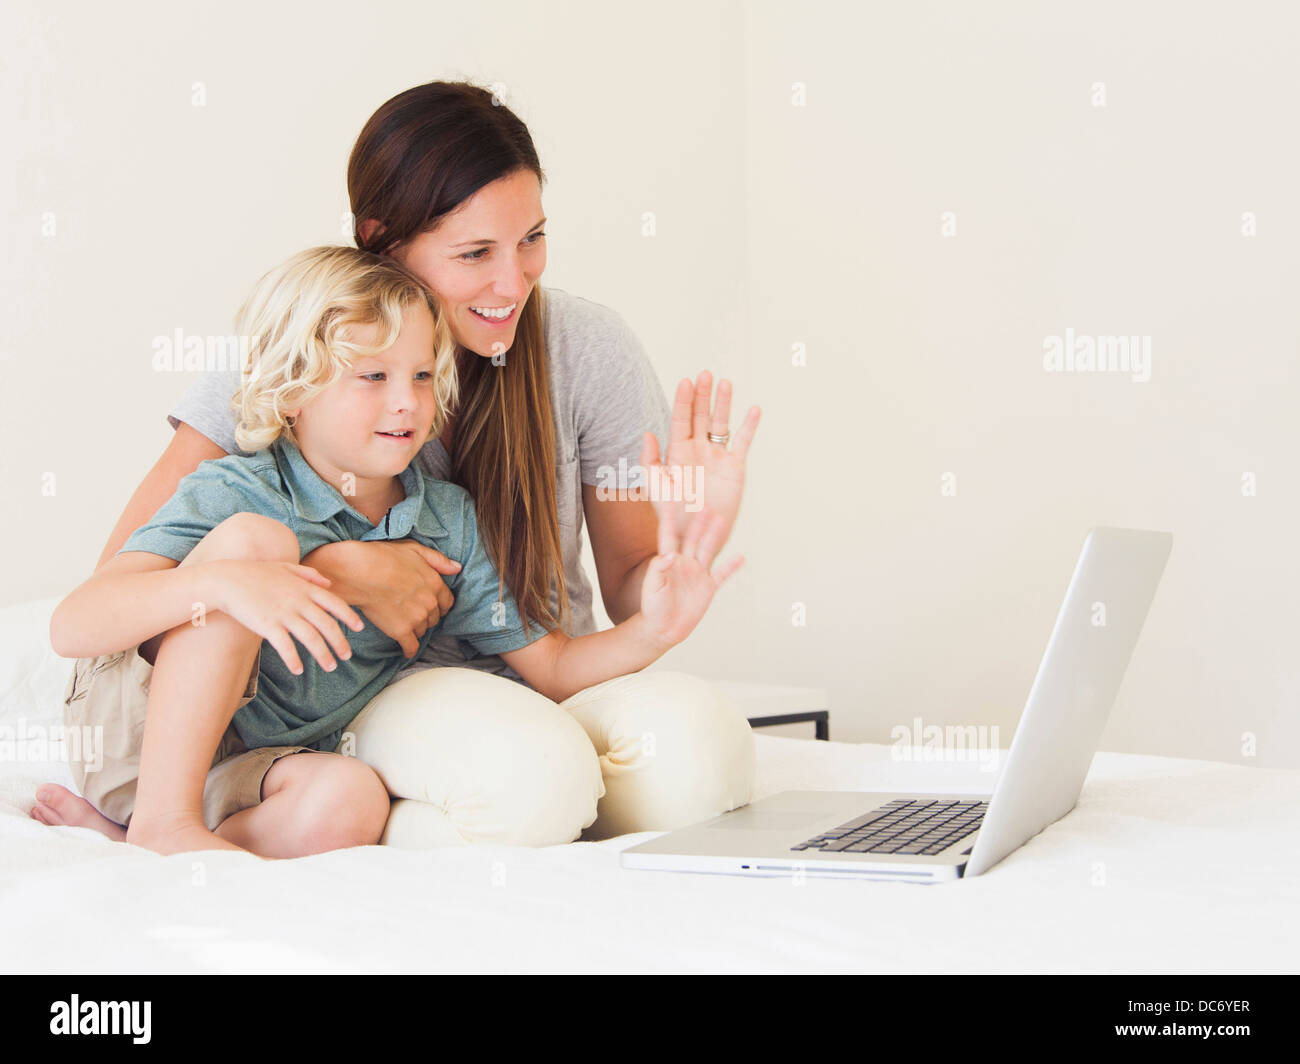 Mother with son (6-7) using laptop Stock Photo